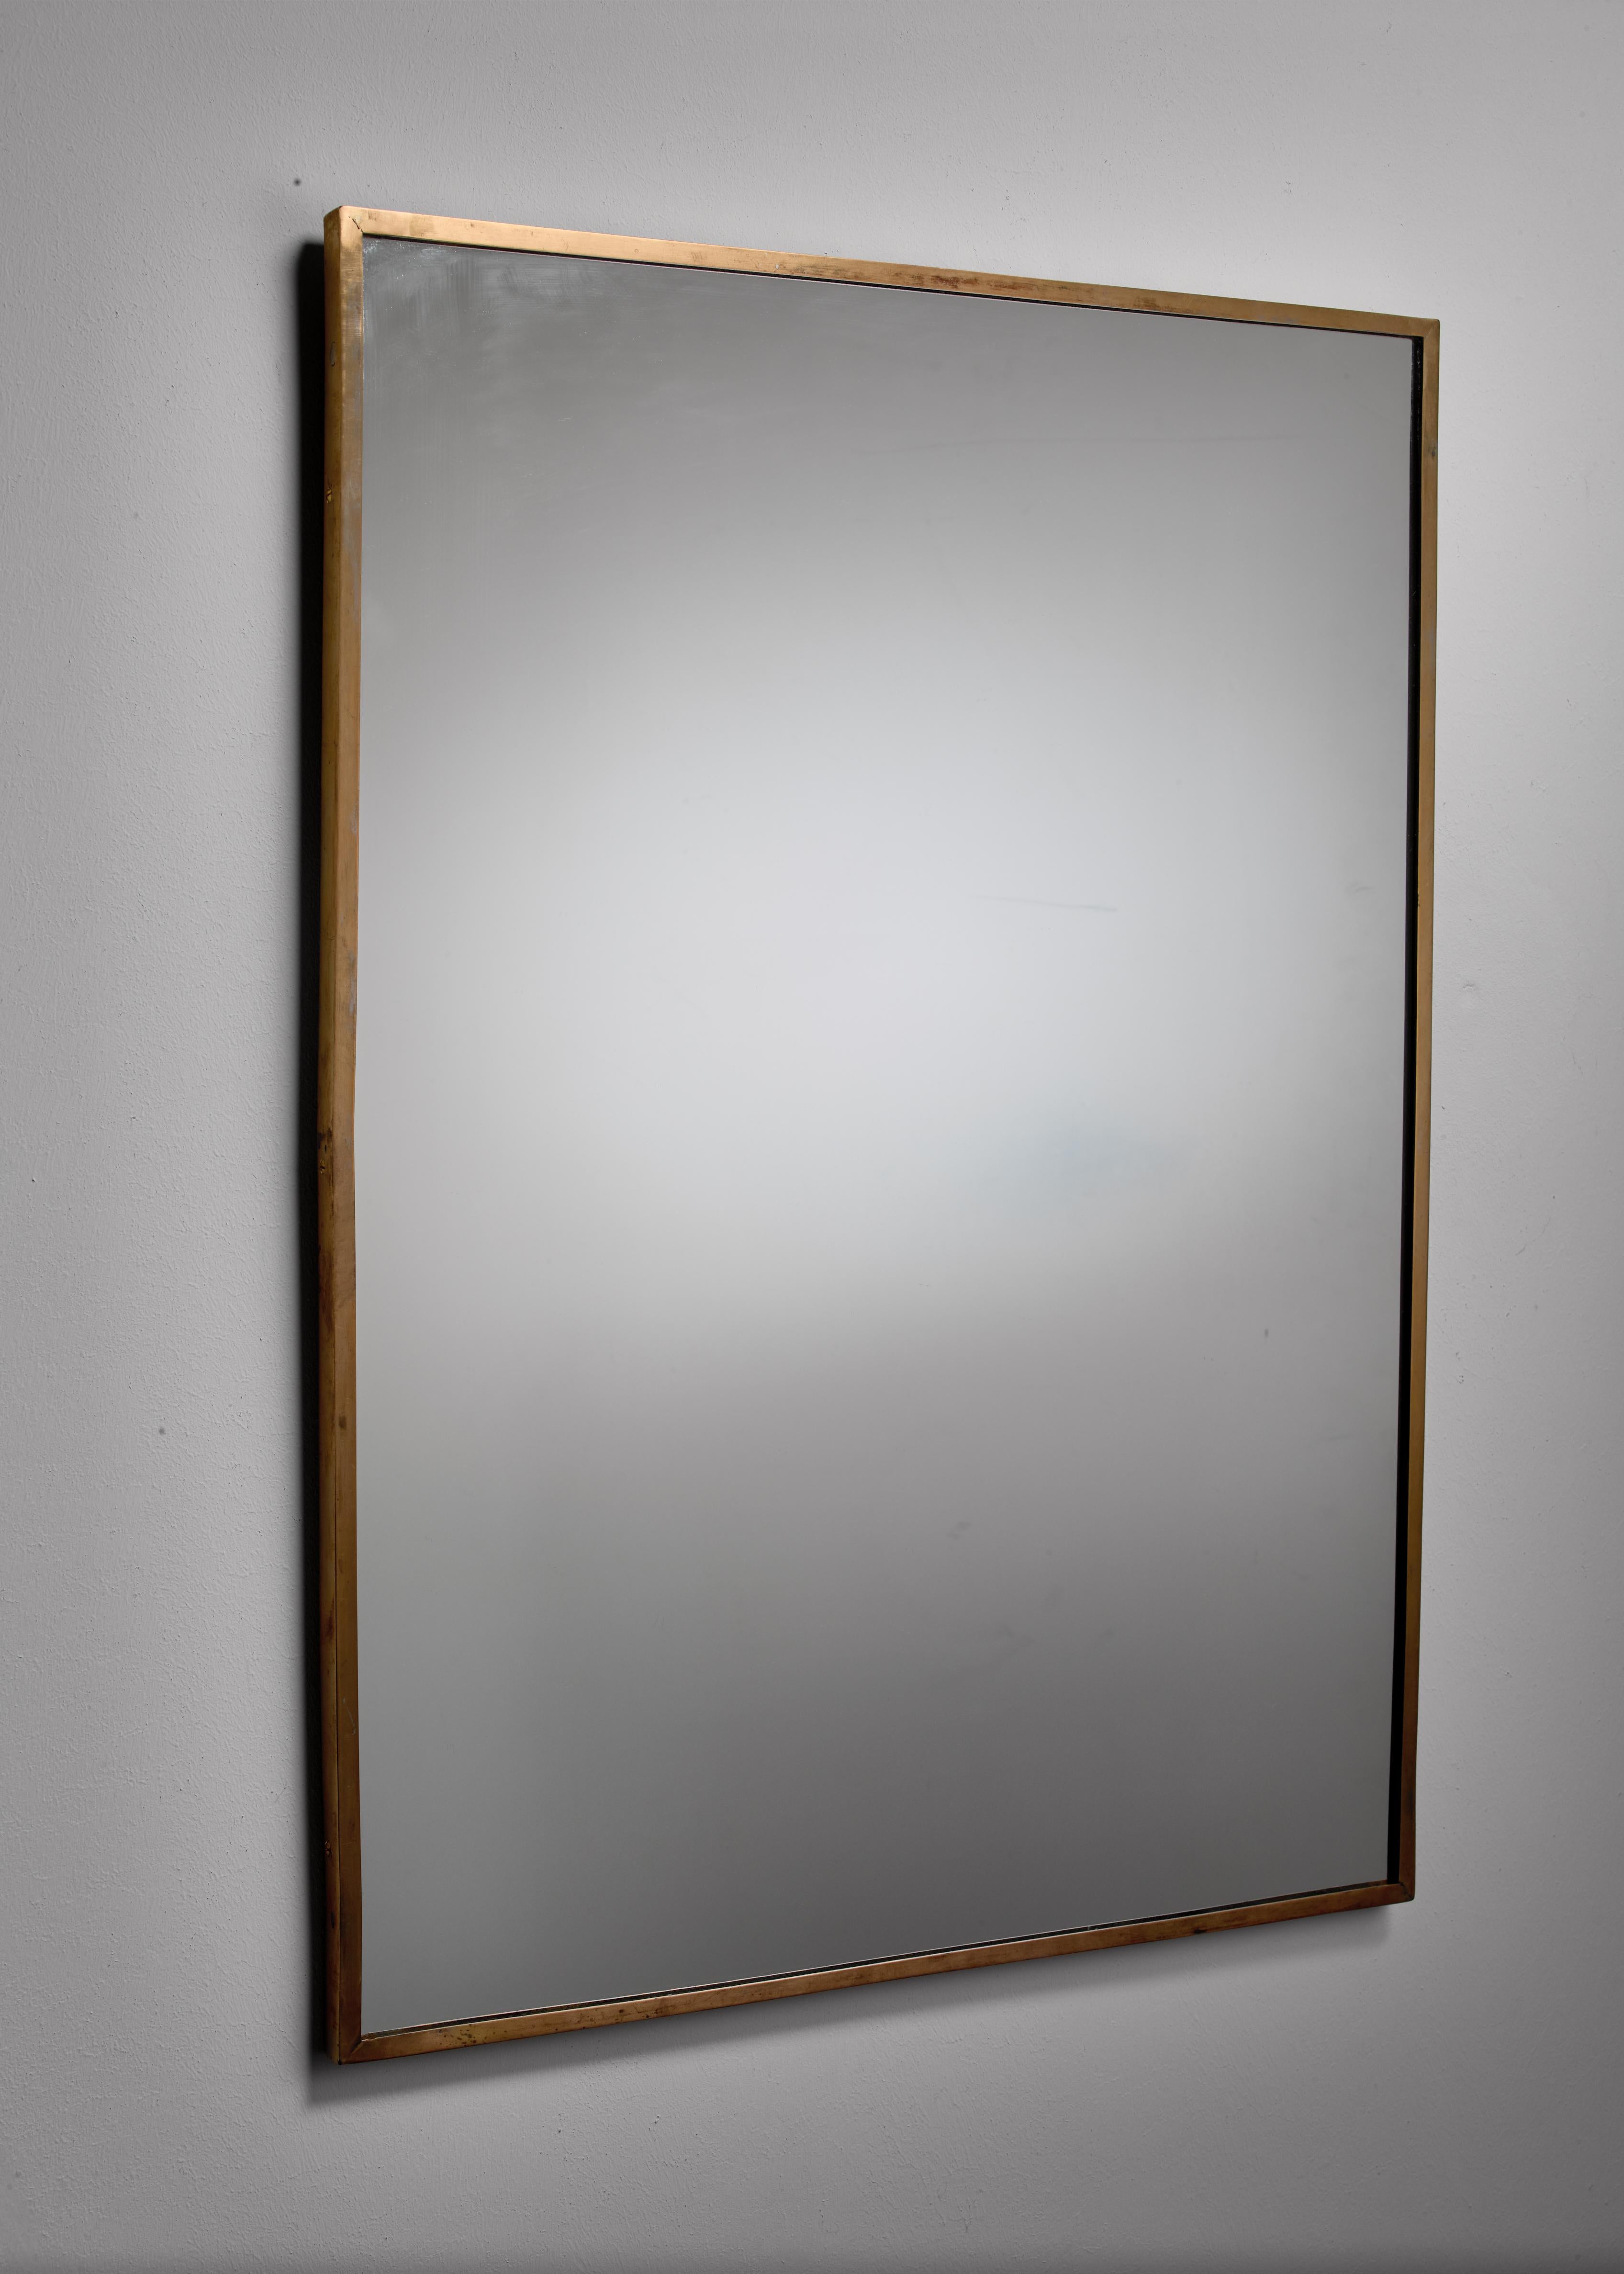 A rectangular Italian wall or overmantel mirror with a brass frame on a wooden base. A simple and elegant design and in good vintage condition. 
 We have several other brass wall mirrors available in various sizes.